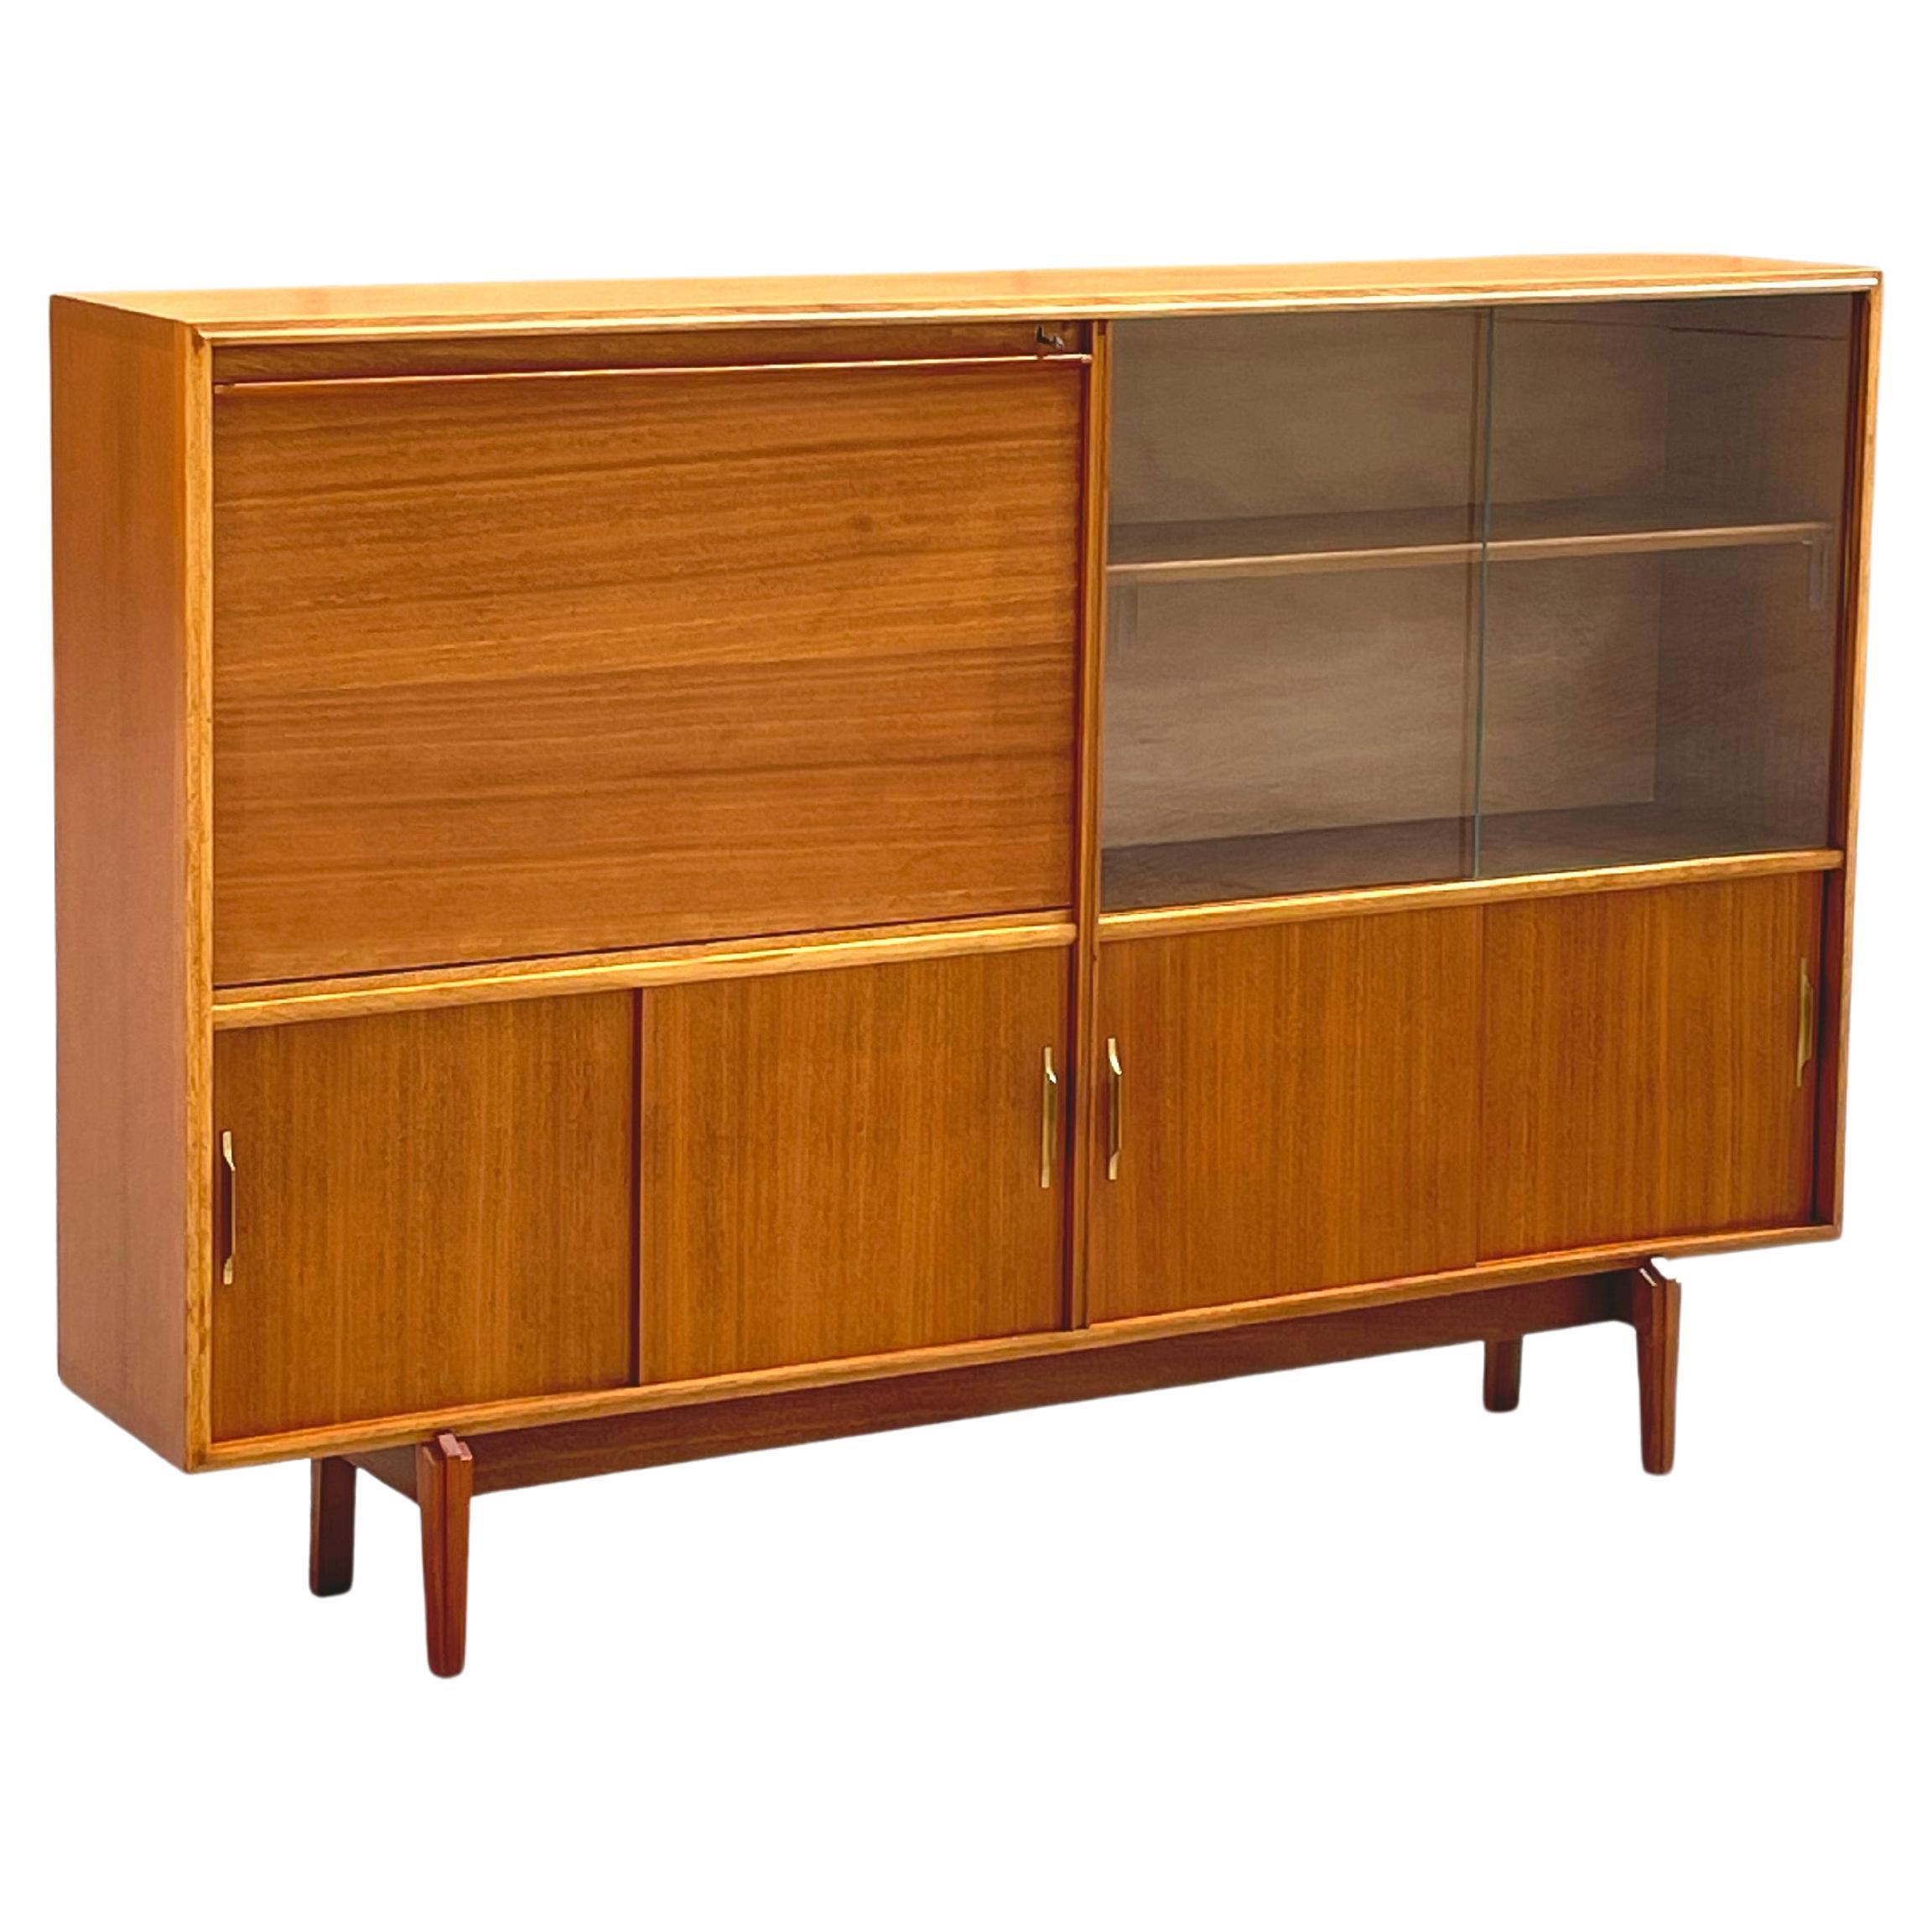 Mid-Century Modern Drinks Cocktail Cabinet Sideboard by Beaver and Tapley